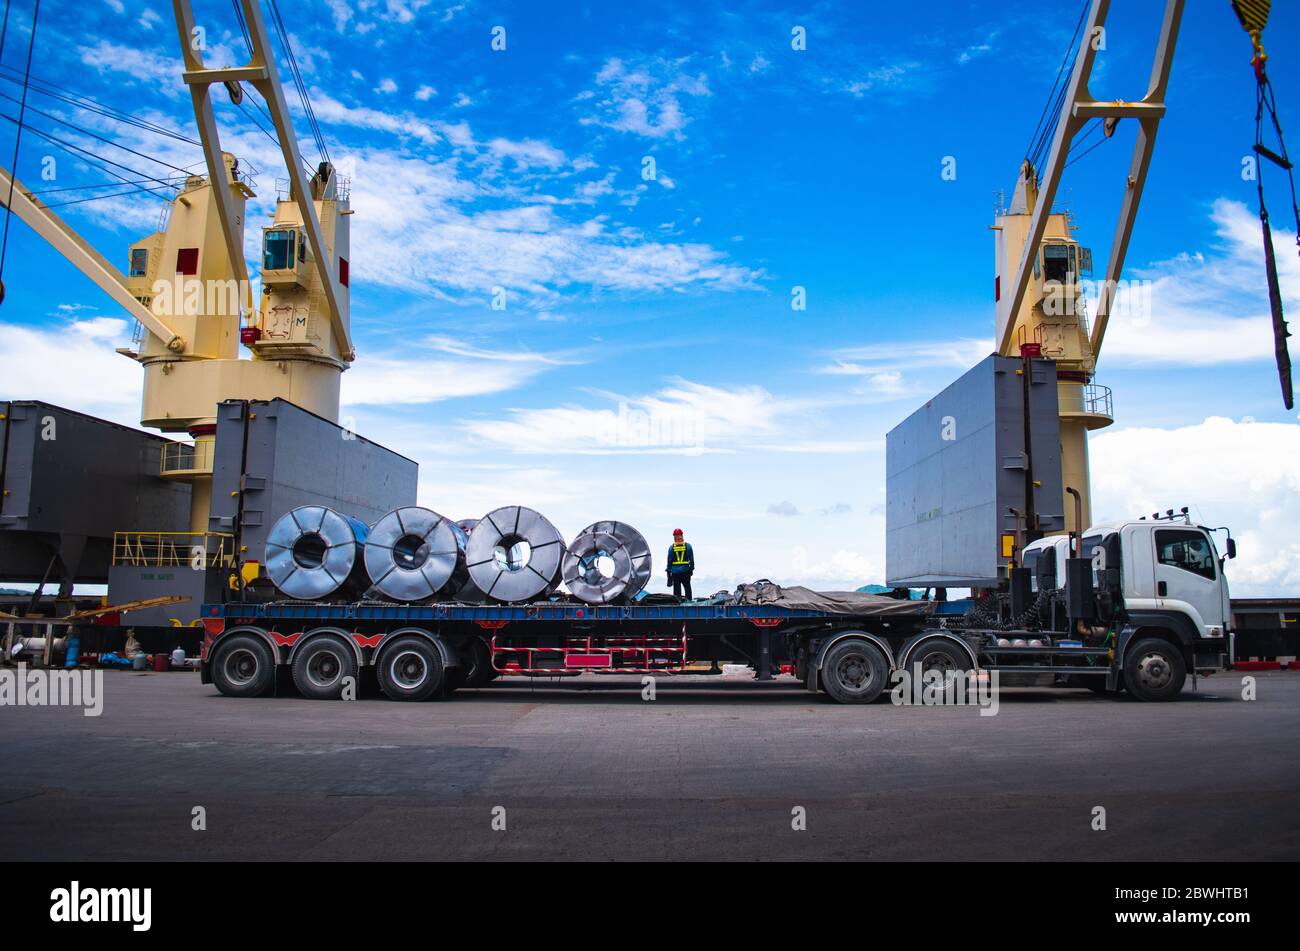 Truck receive steel coils alongside large cargo ship at port Stock Photo